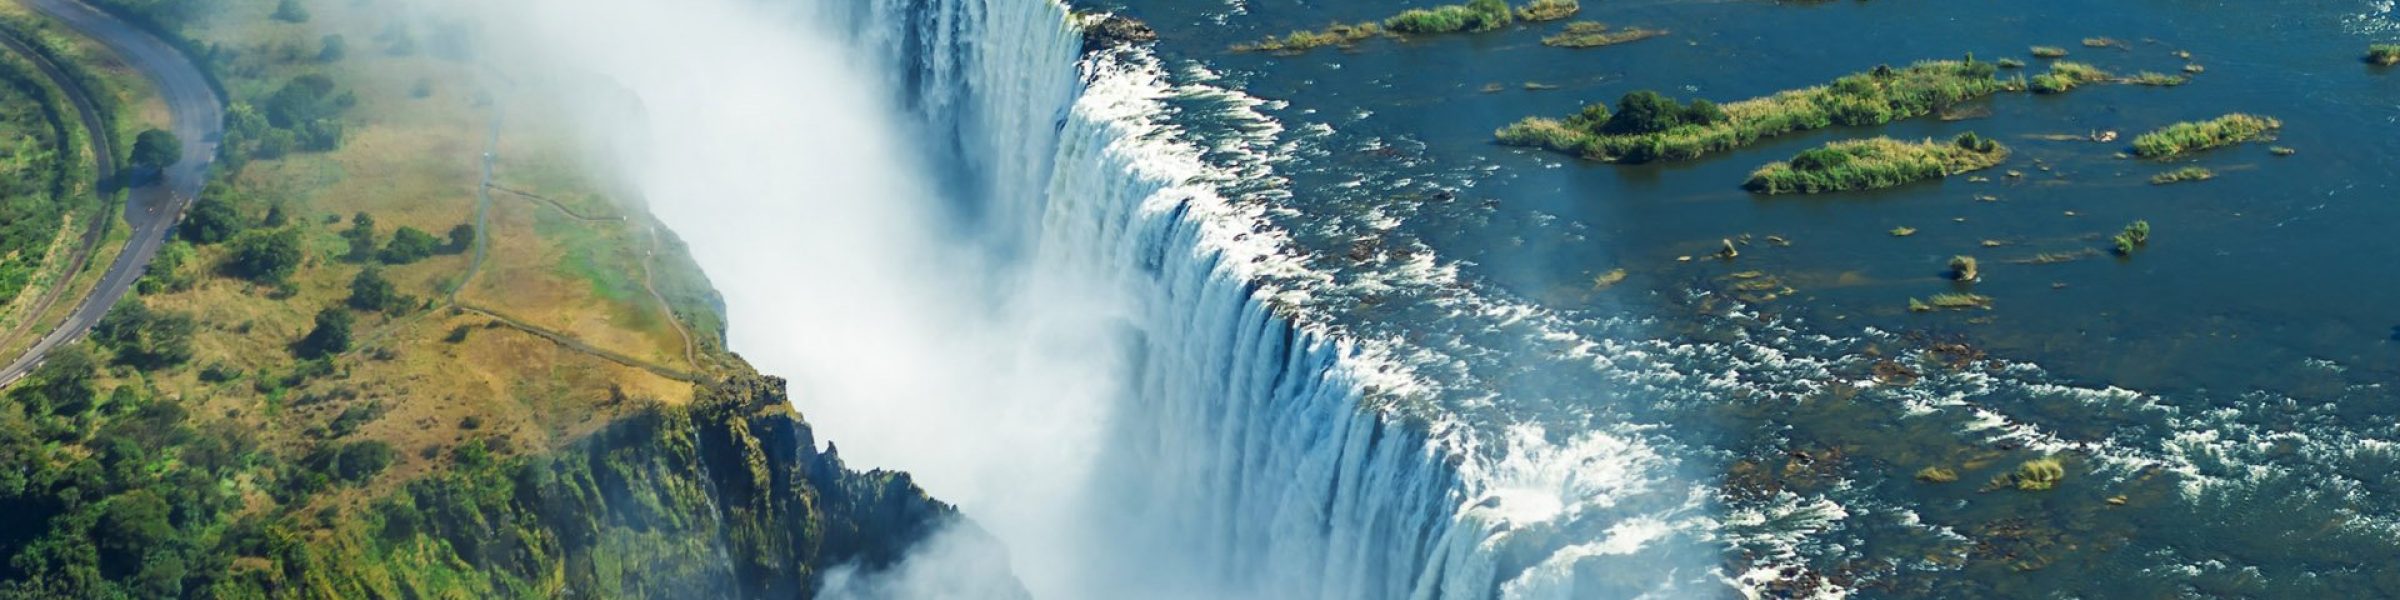 victoria-falls-from-the-air-livingstone-zambia